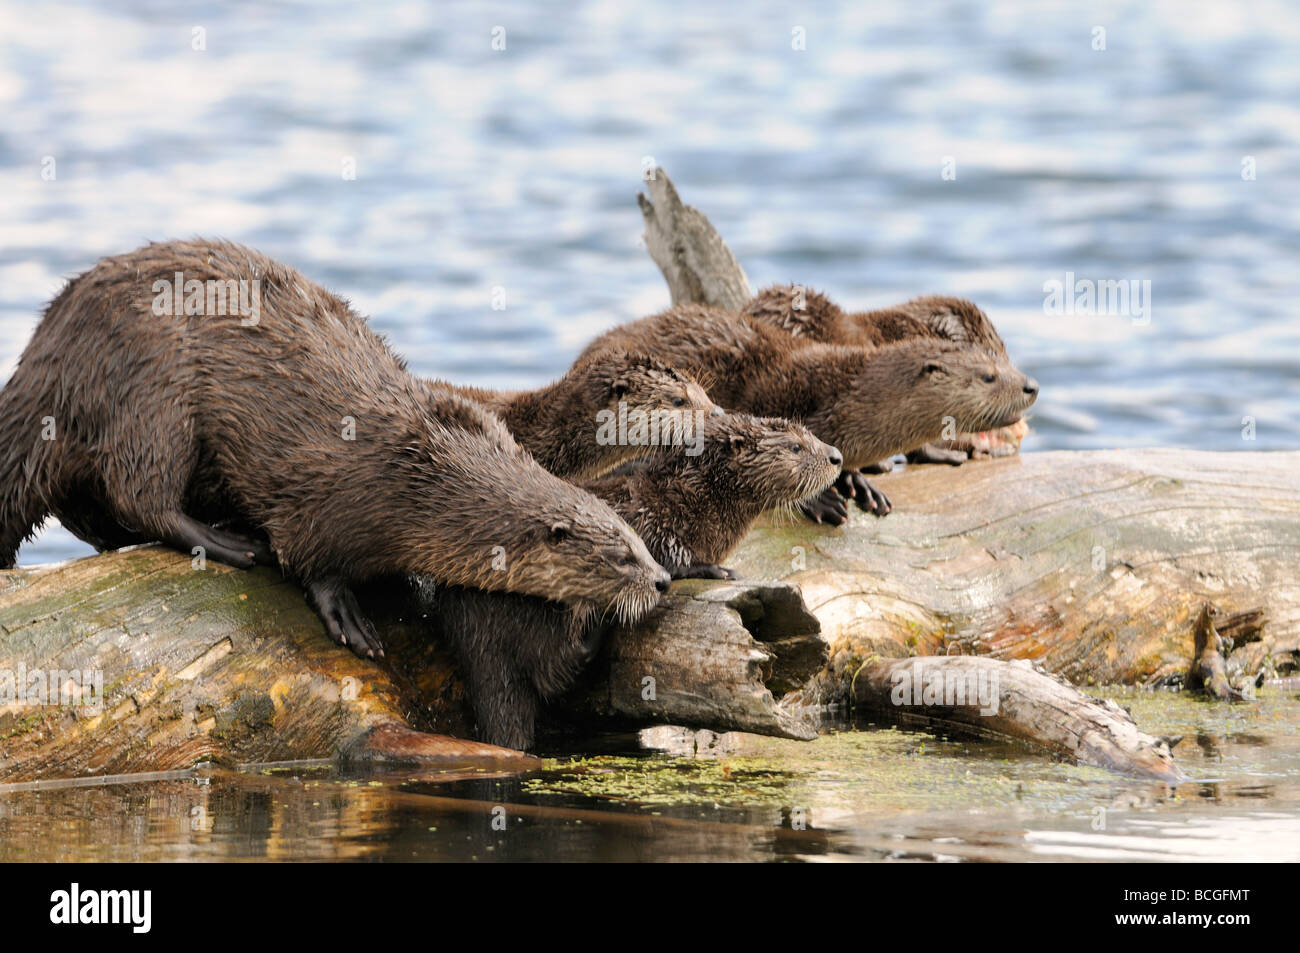 Stock photo of a river otter family on a log, Yellowstone National Park, Montana, 2009. Stock Photo